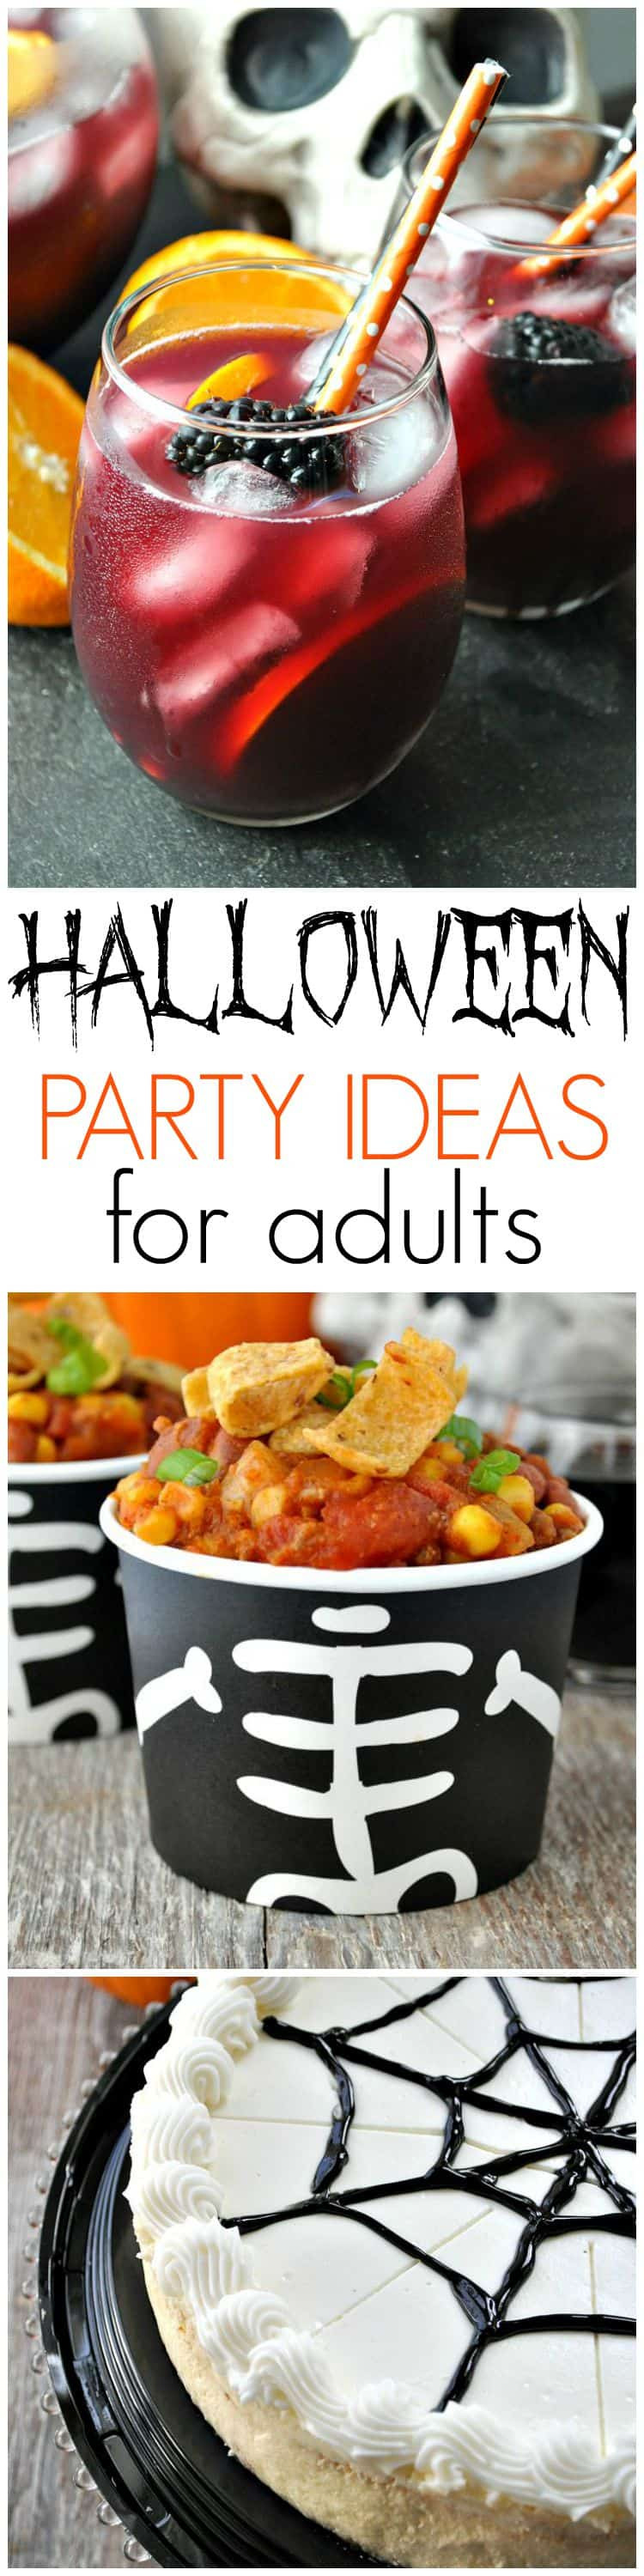 Halloween Party Ideas For Adults
 Slow Cooker Pumpkin Chili Halloween Party Ideas for